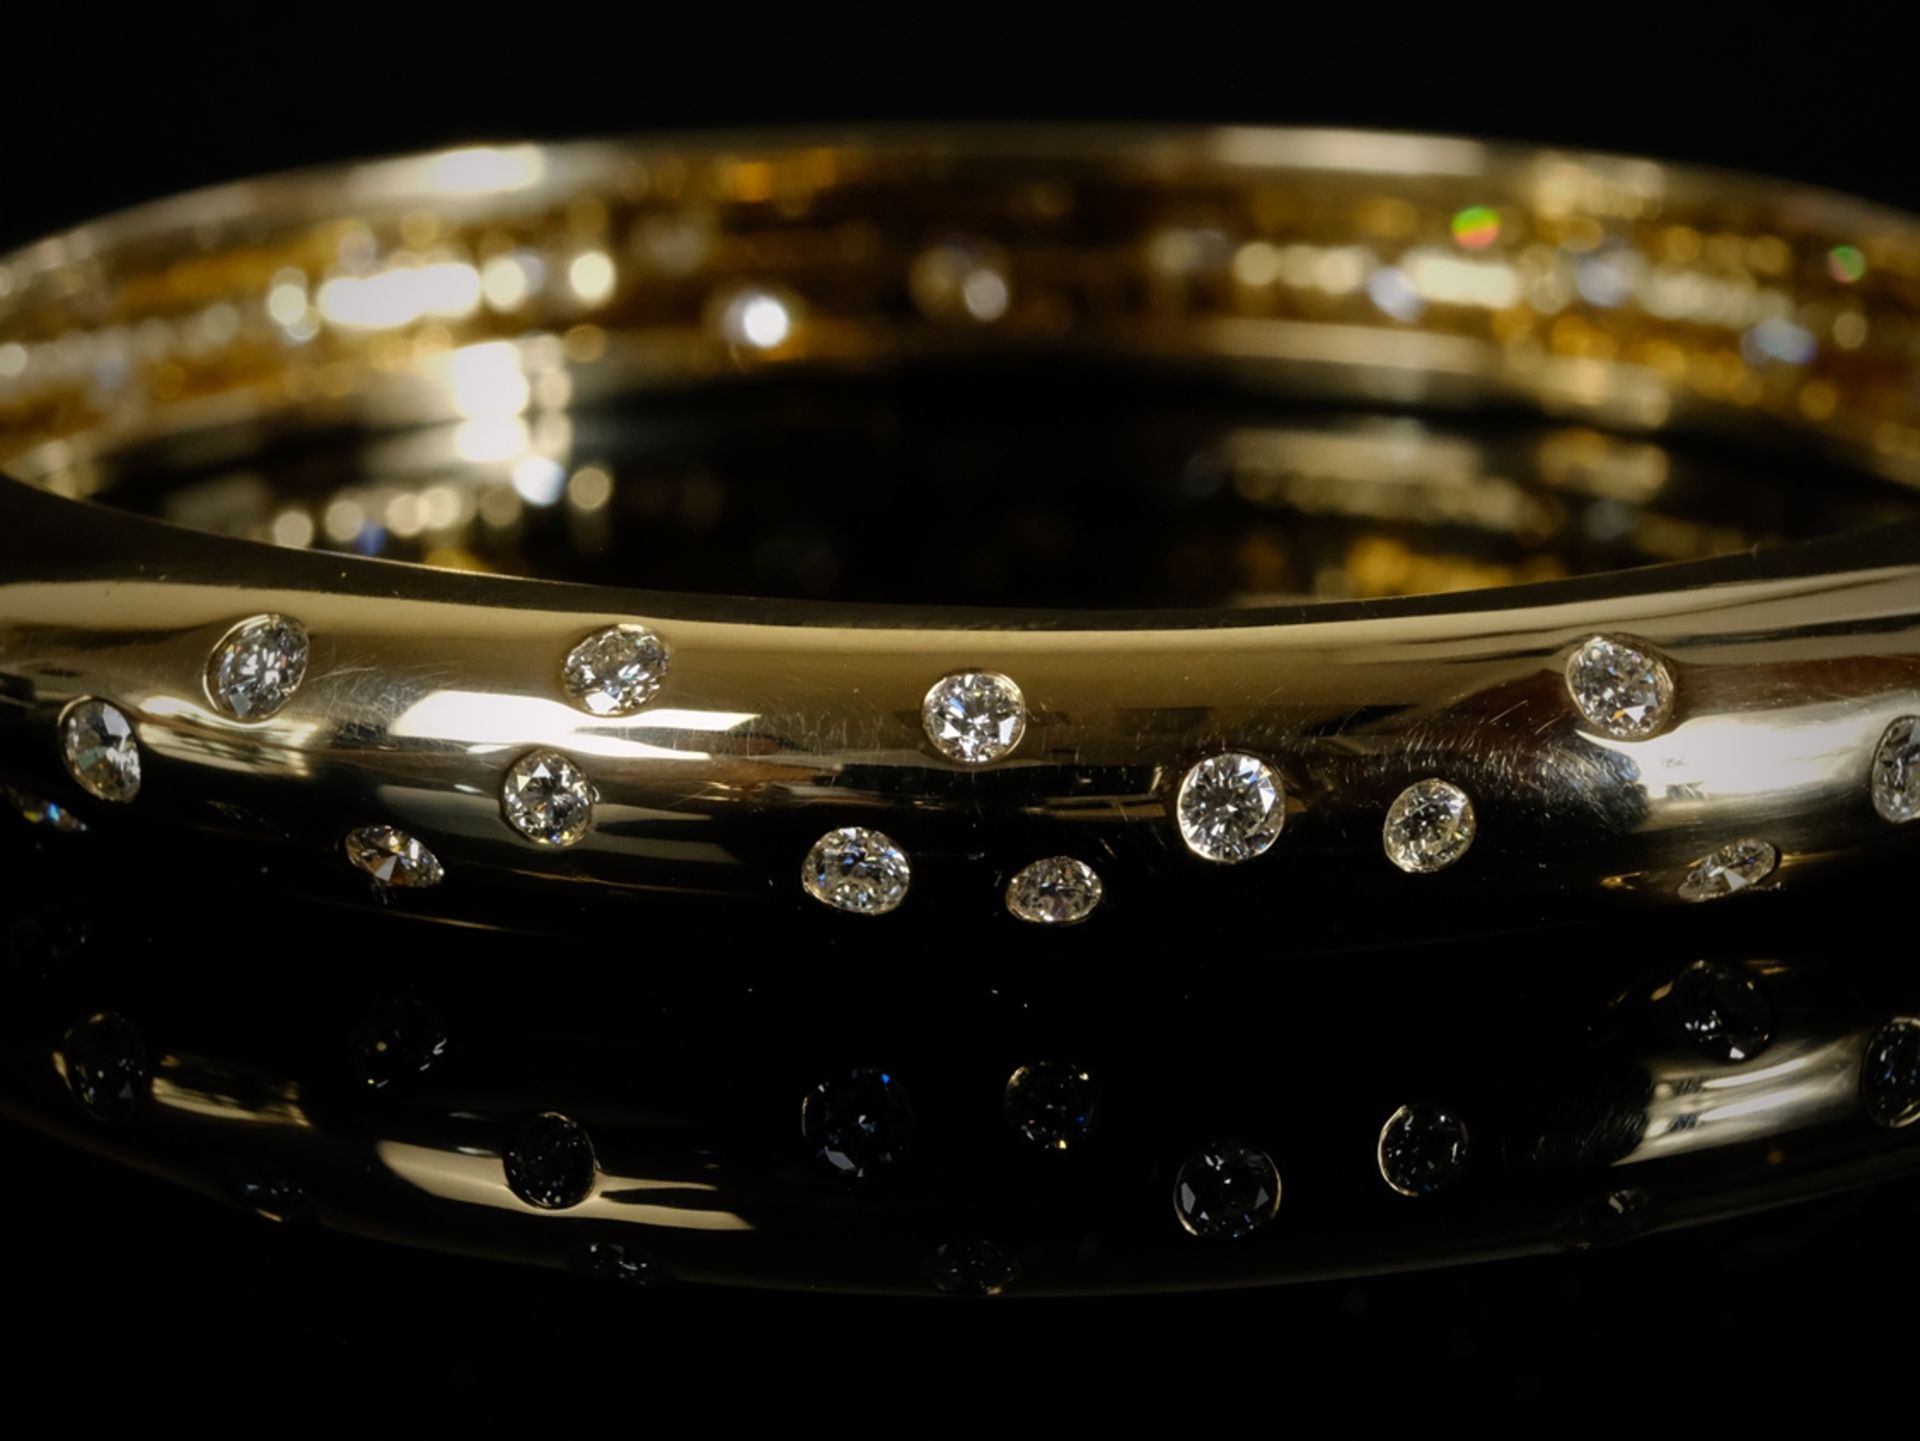 ARMRAID endless, set with many brilliant-cut diamonds of the highest radiance, together around 4.00